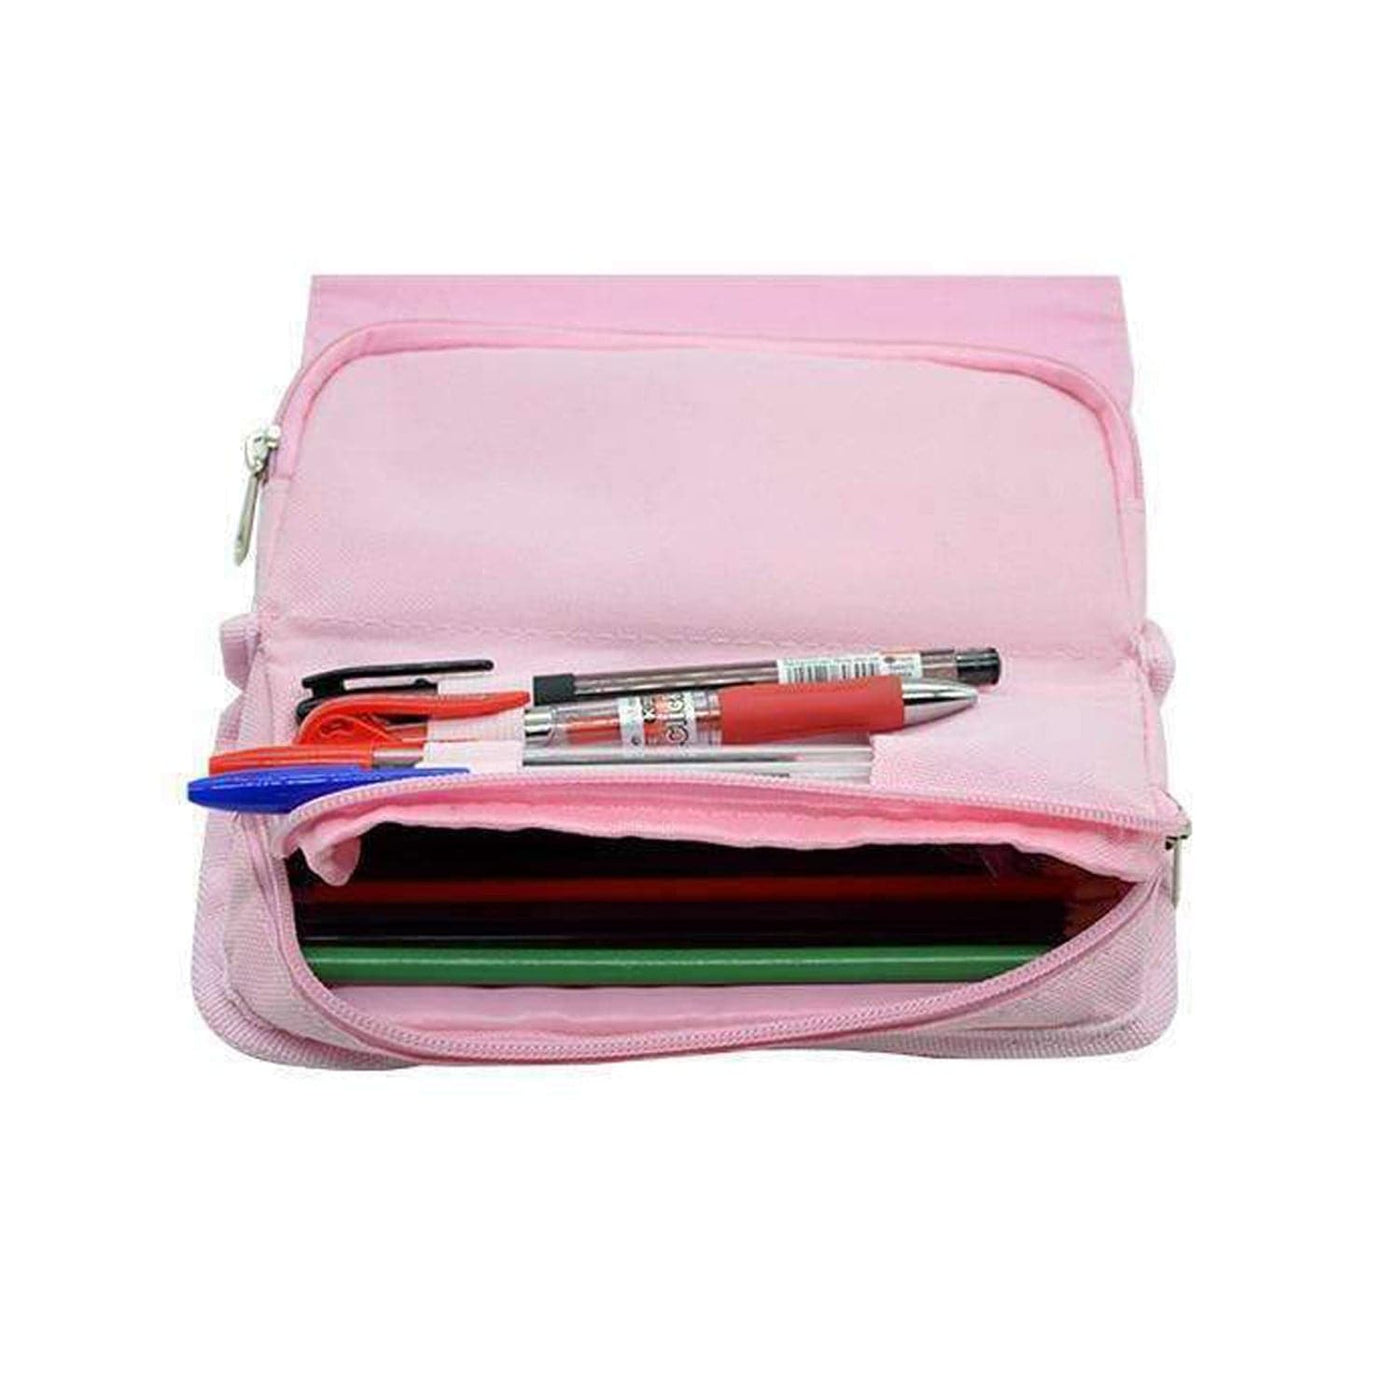 The First Rule Of Truly Living - Vampire Diaries Pencil Case